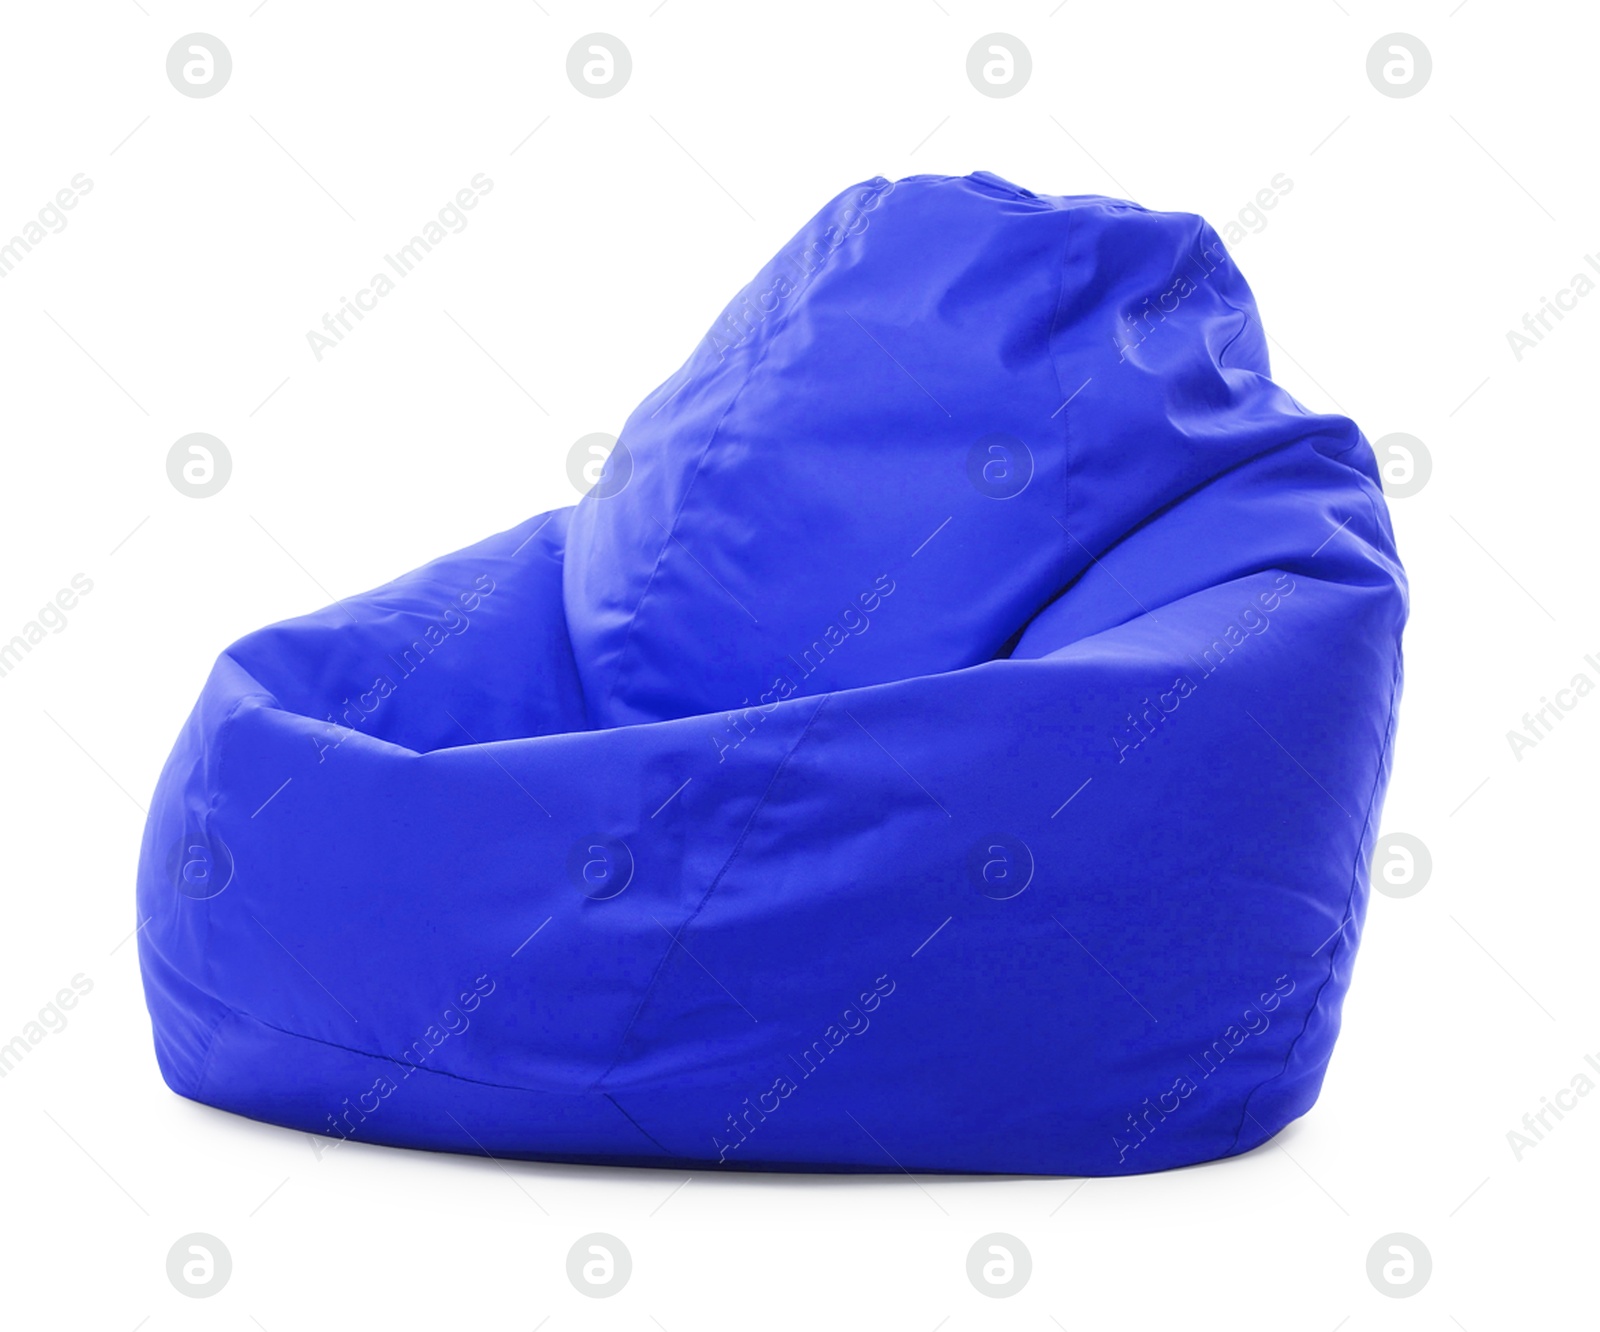 Image of One blue bean bag chair isolated on white